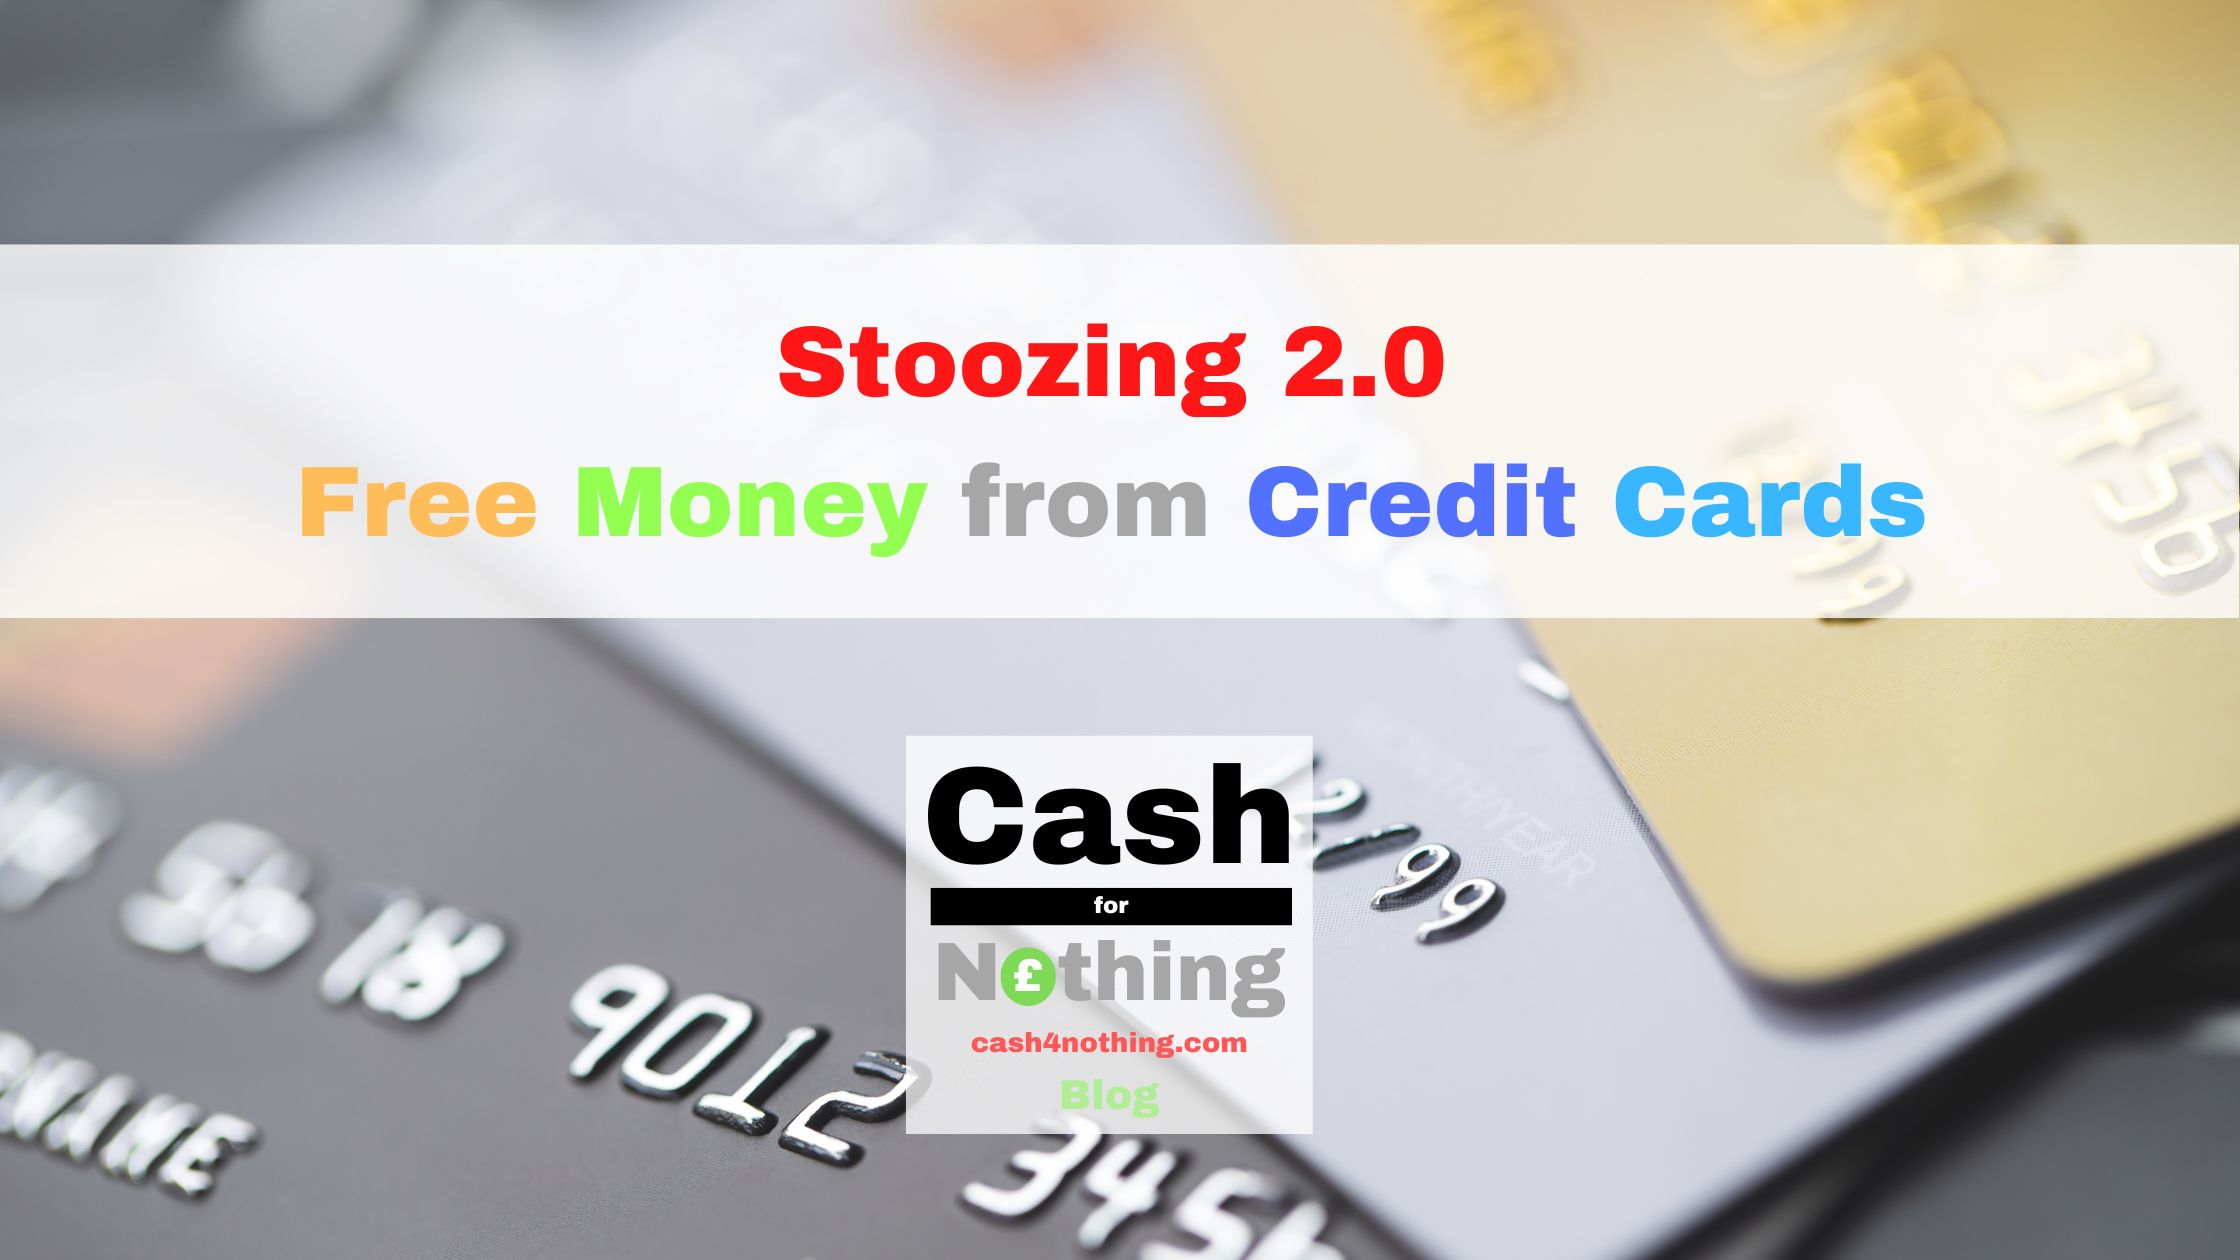 Stoozing 2.0 How to make free money from credit cards